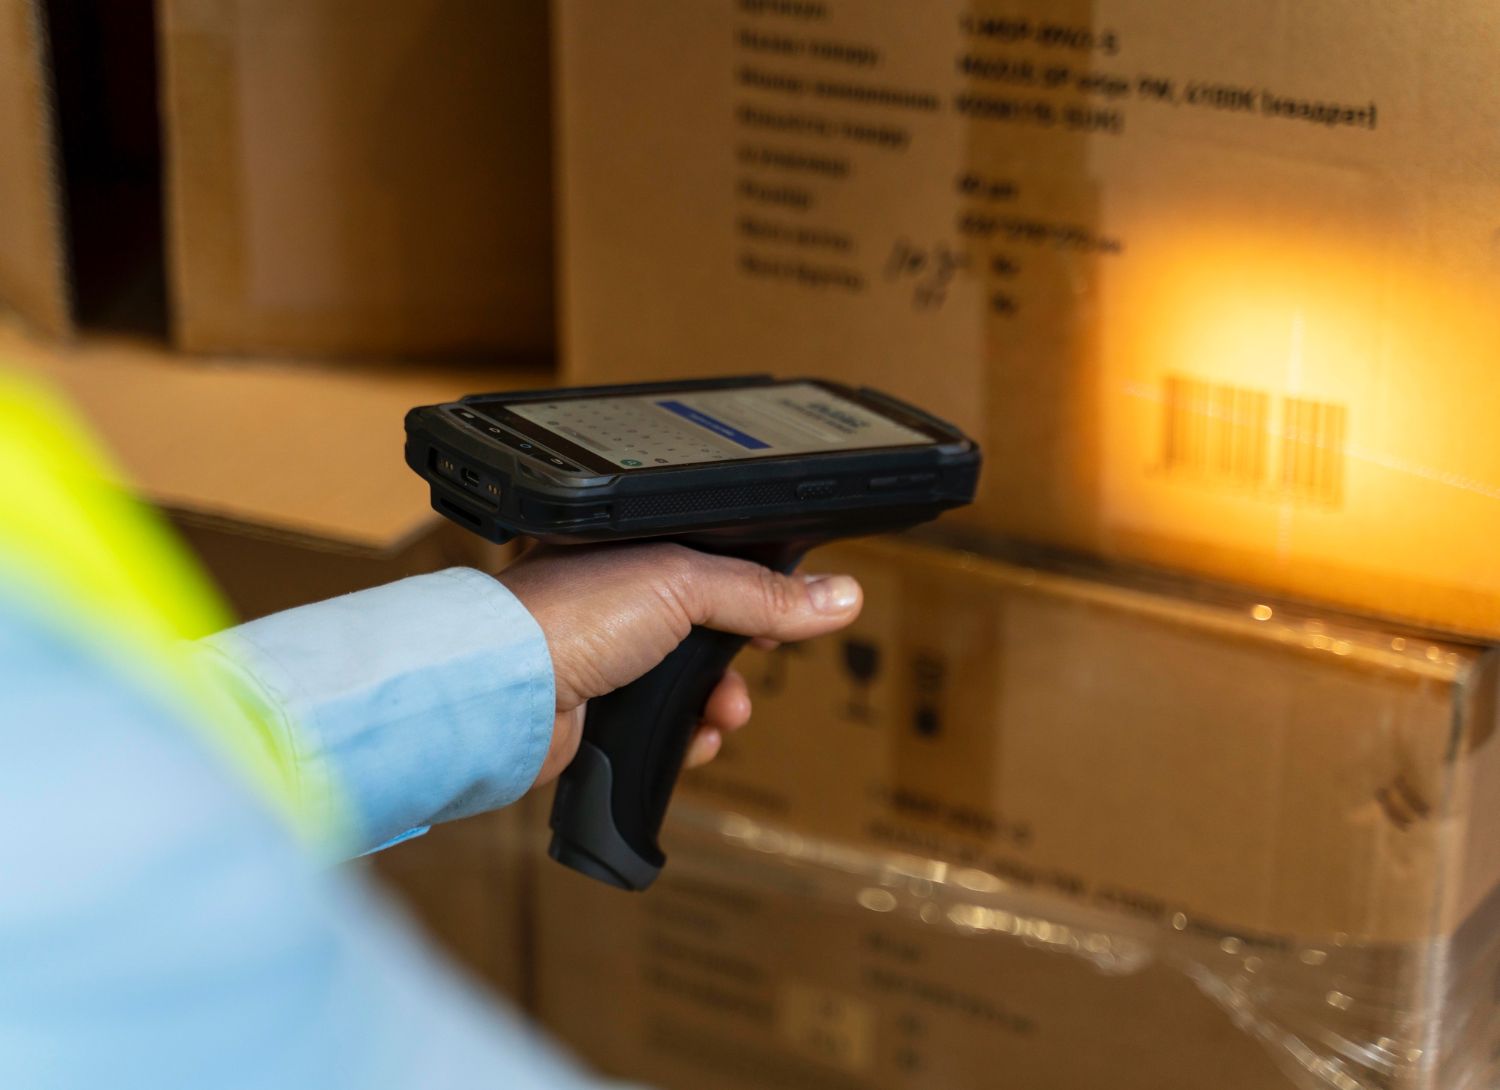 wholesale distribution, inventory check, wholesale inventory management, barcoding stock,  marketplace automation